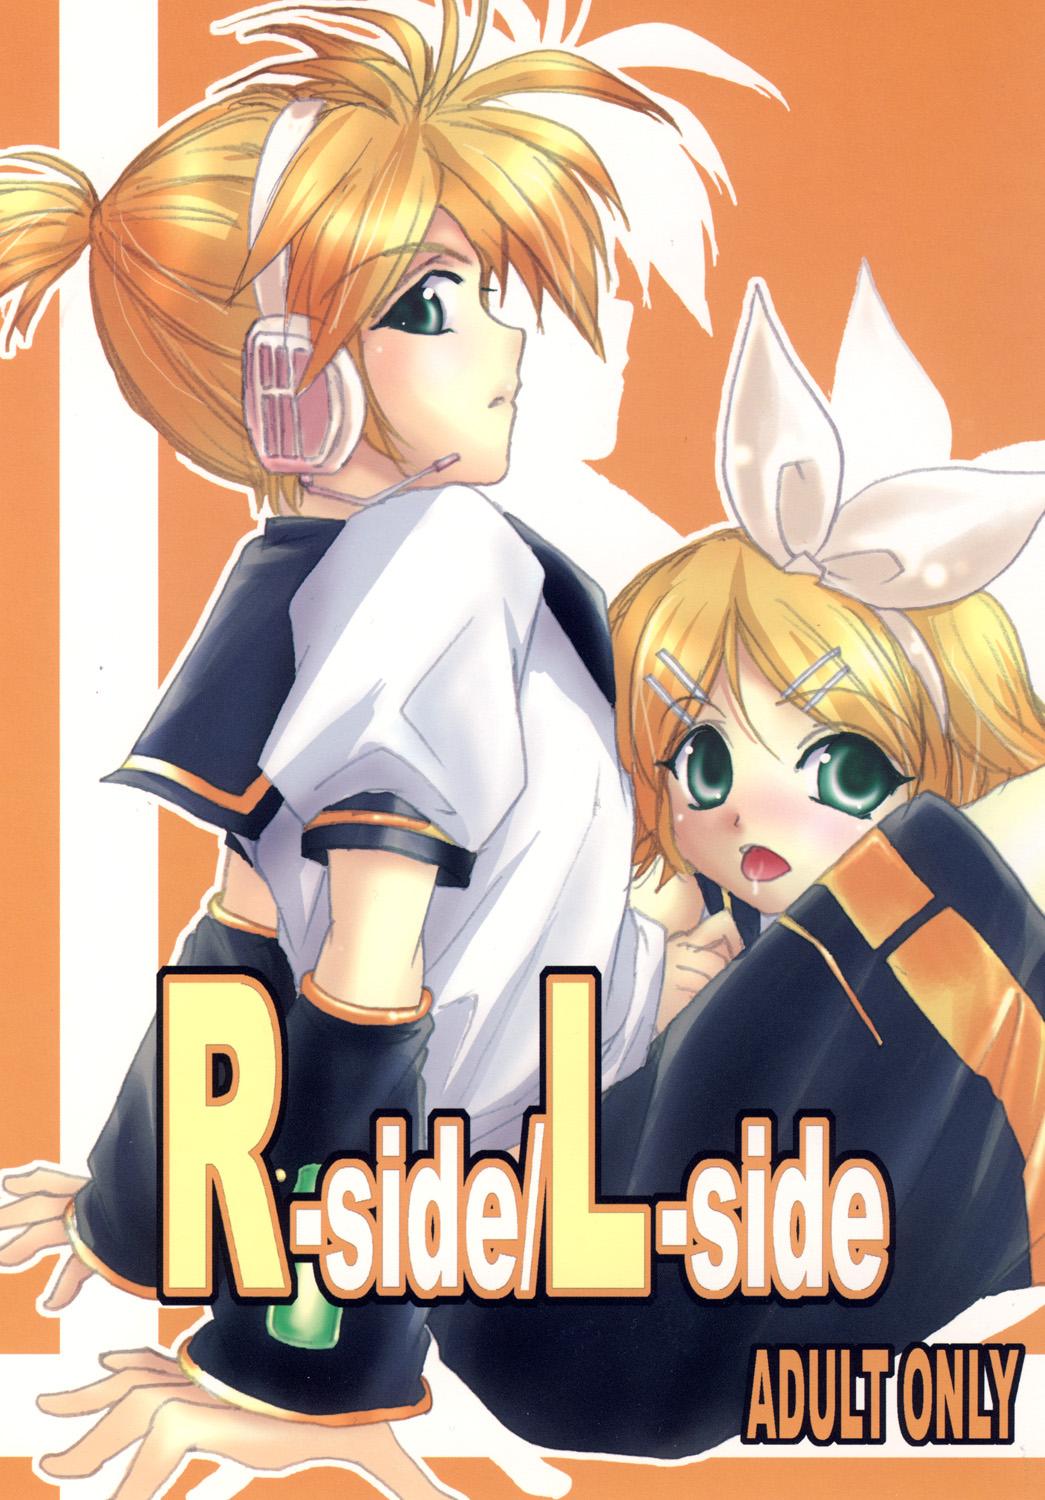 Assfuck [RUBY FRUIT (Kotoduki Z)] R-Side/L-Side (Vocaloid) [Digital] - Vocaloid Delicia - Picture 1